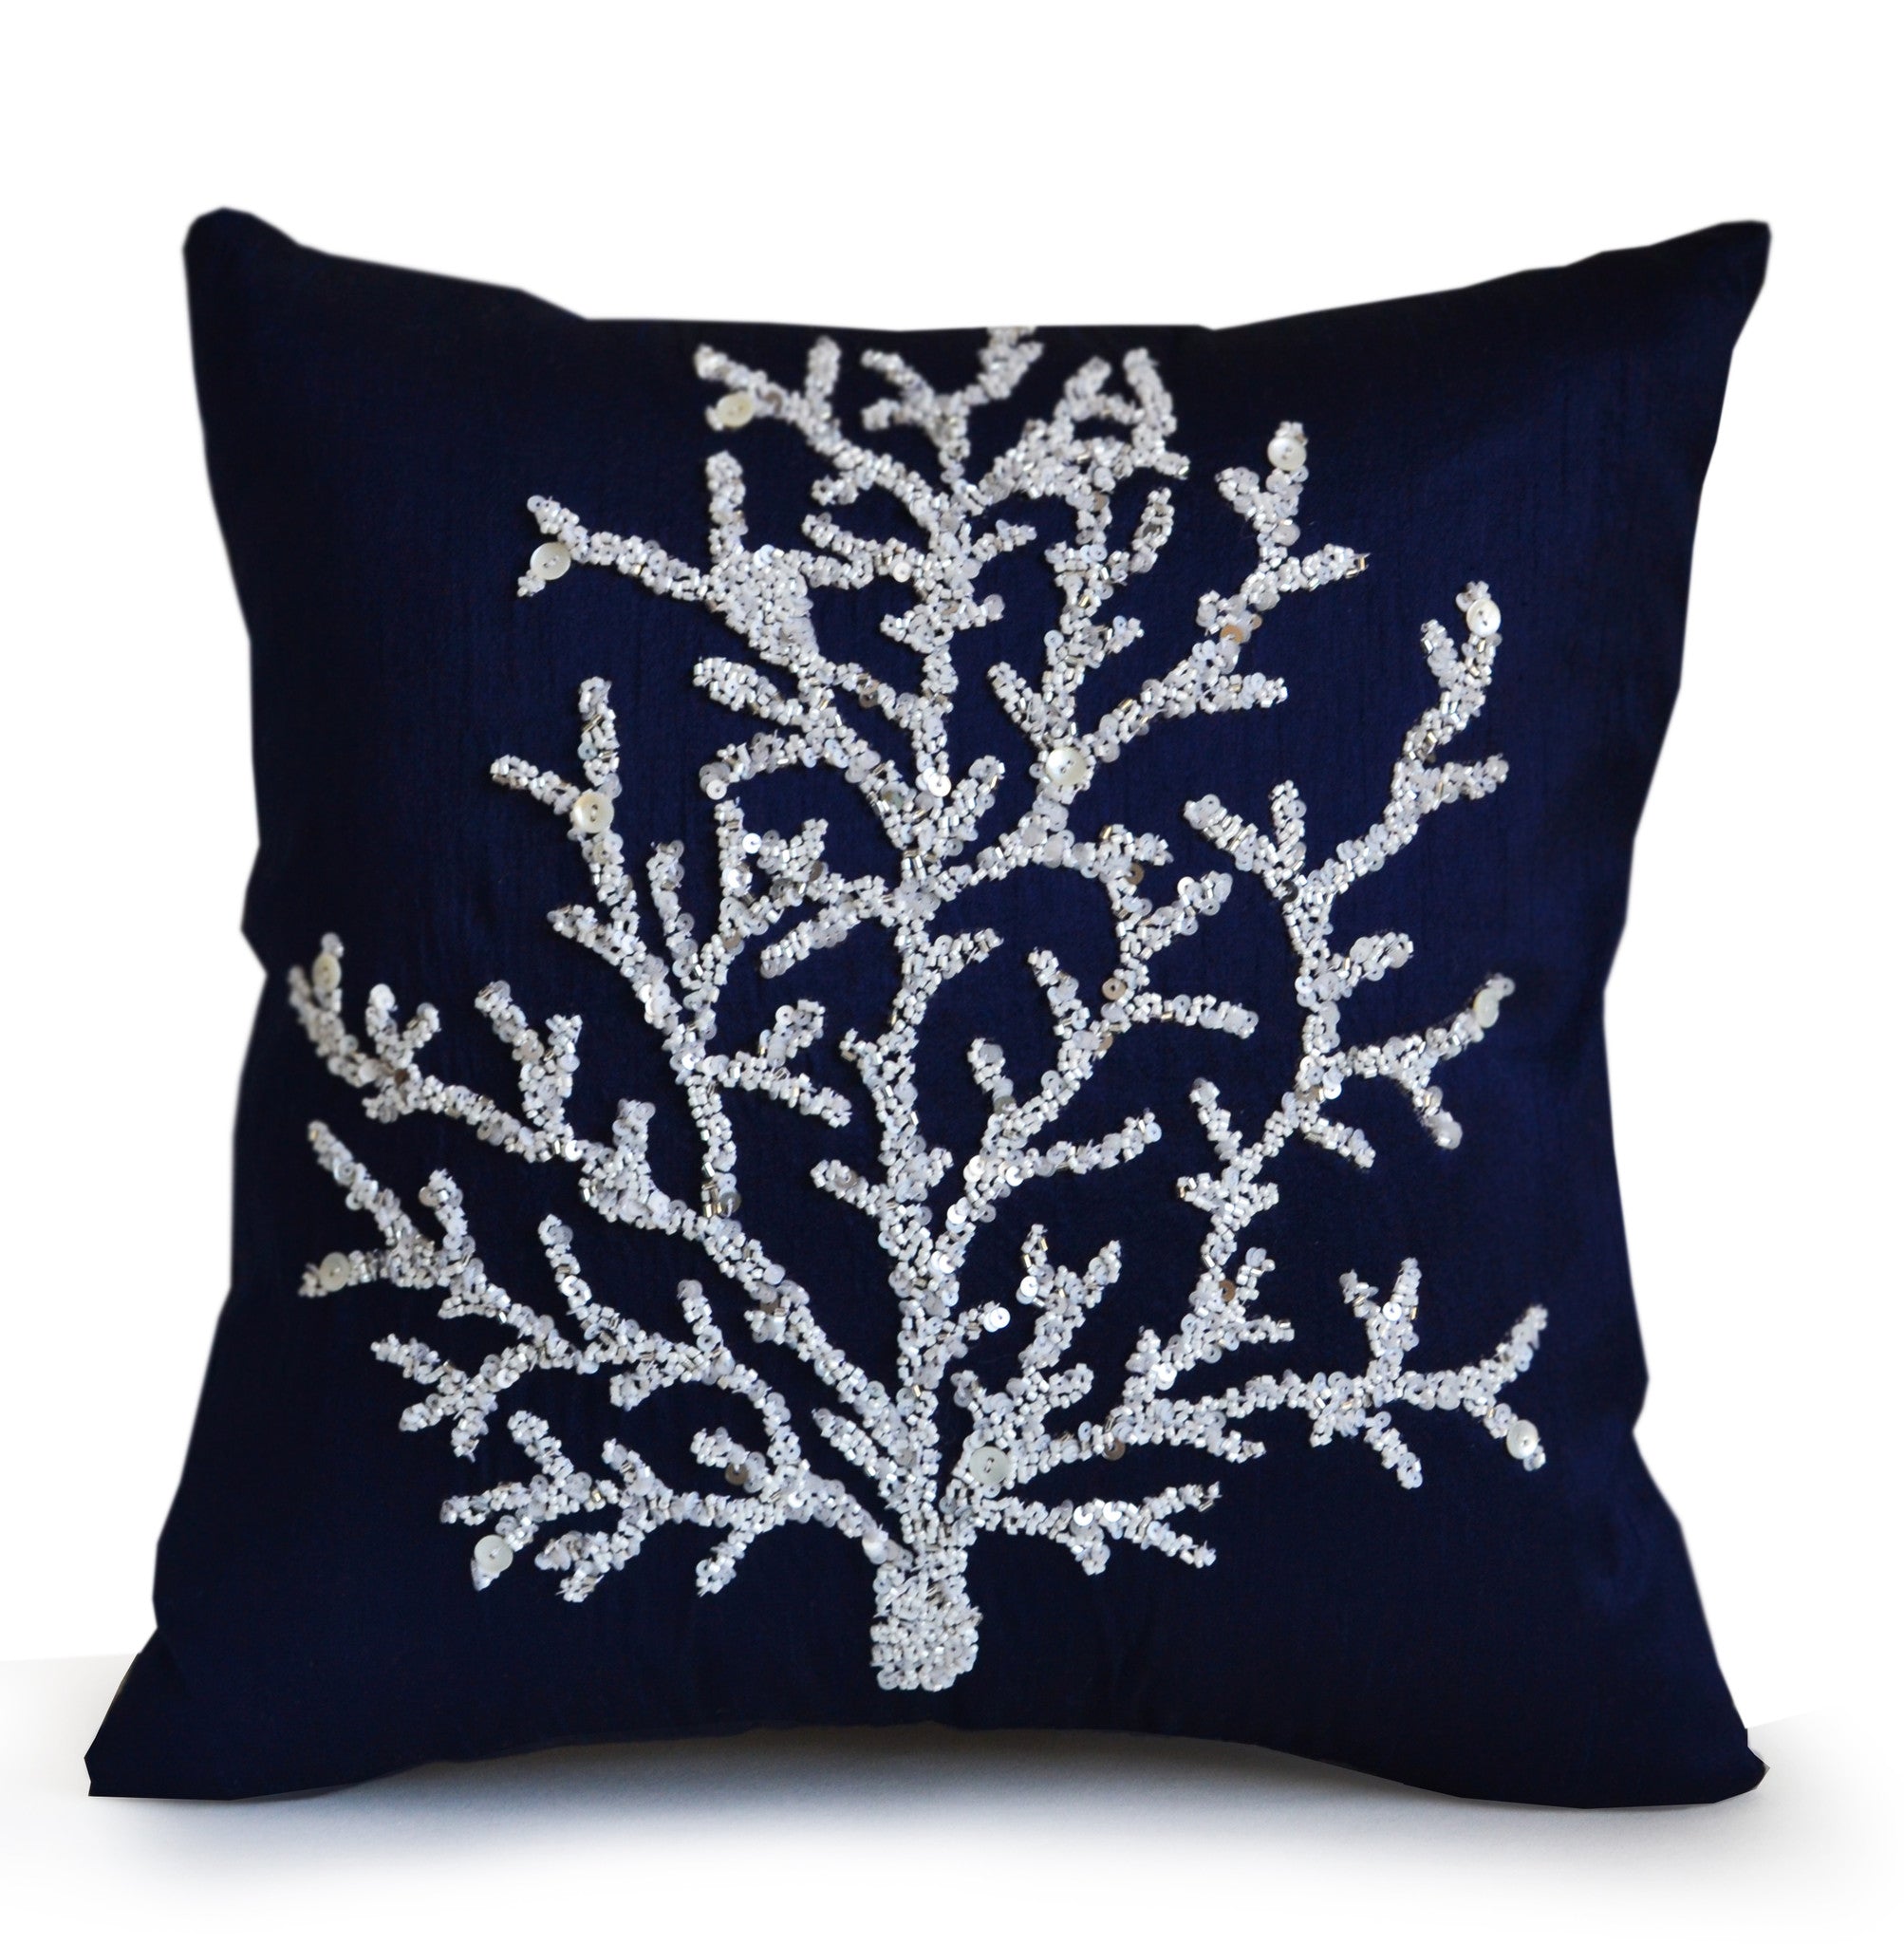 Shop online for handmade blue throw pillow cover with coral beads